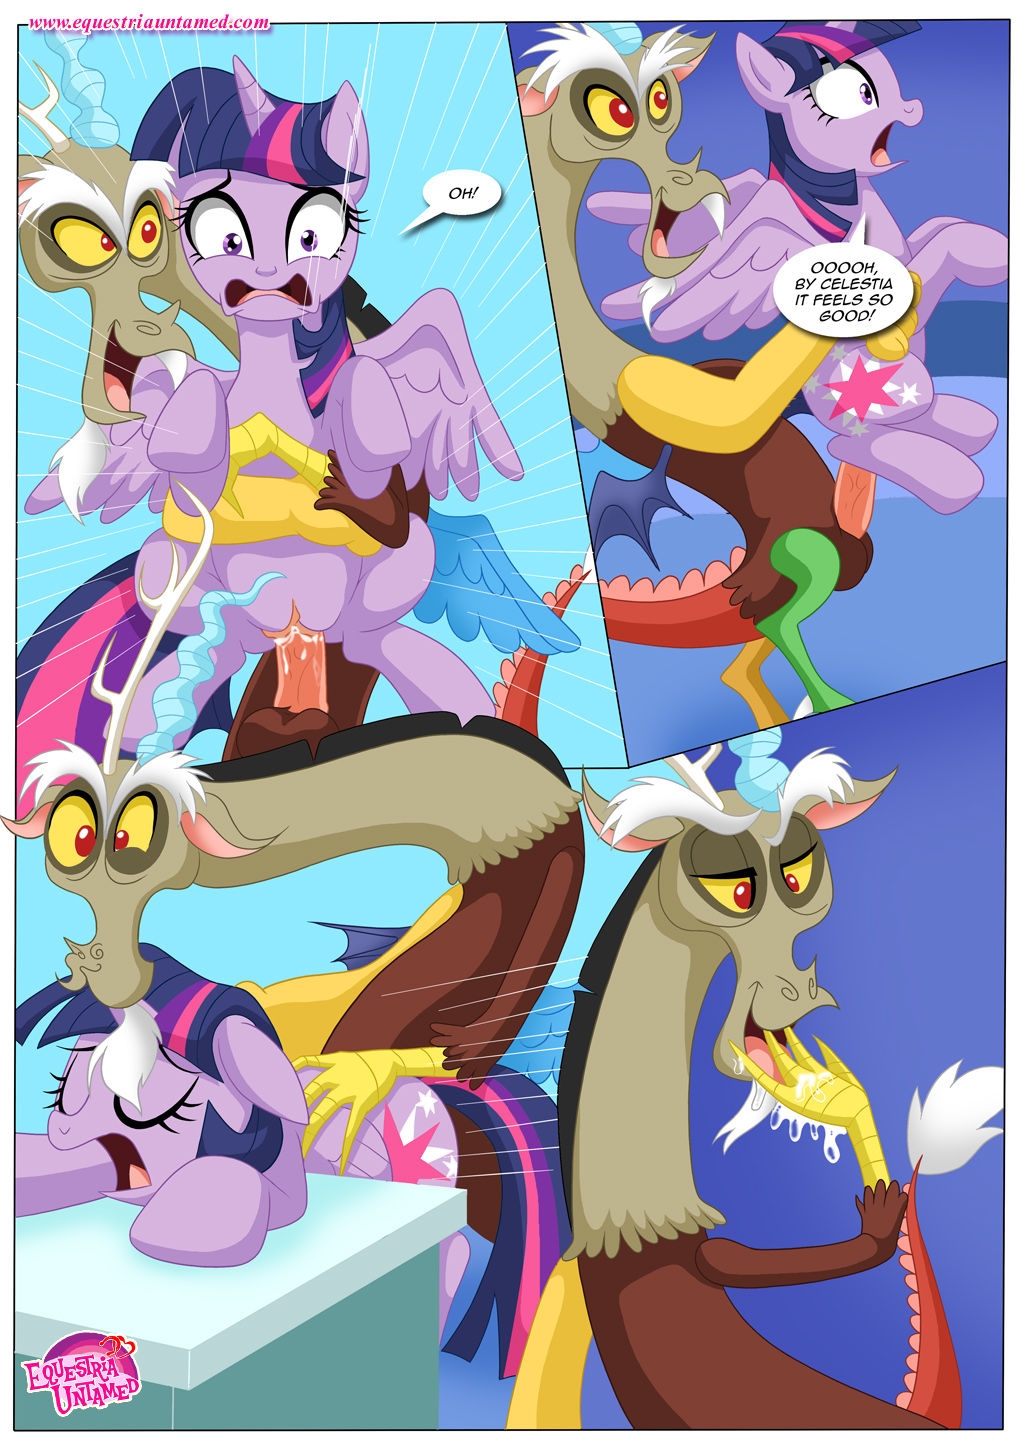 [Equestria Untamed (Palcomix)] Libraries Are Supposed To Be Quiet (My Little Pony Friendship Is Magic) 8